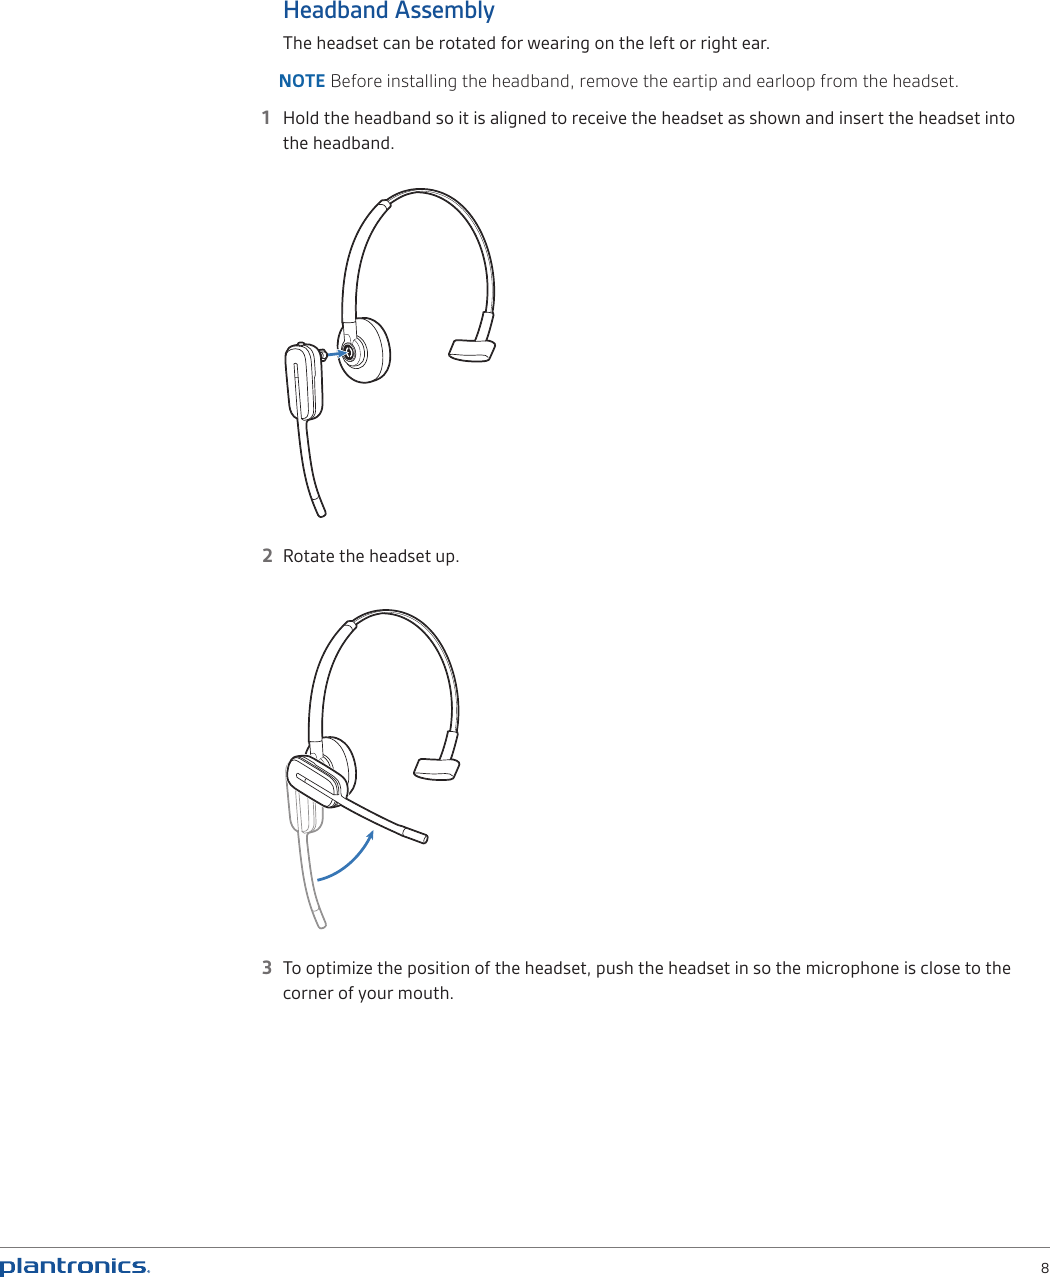  8Headband AssemblyThe headset can be rotated for wearing on the left or right ear.NOTE Before installing the headband, remove the eartip and earloop from the headset. 1  Hold the headband so it is aligned to receive the headset as shown and insert the headset into the headband. 2  Rotate the headset up.3  To optimize the position of the headset, push the headset in so the microphone is close to the corner of your mouth.